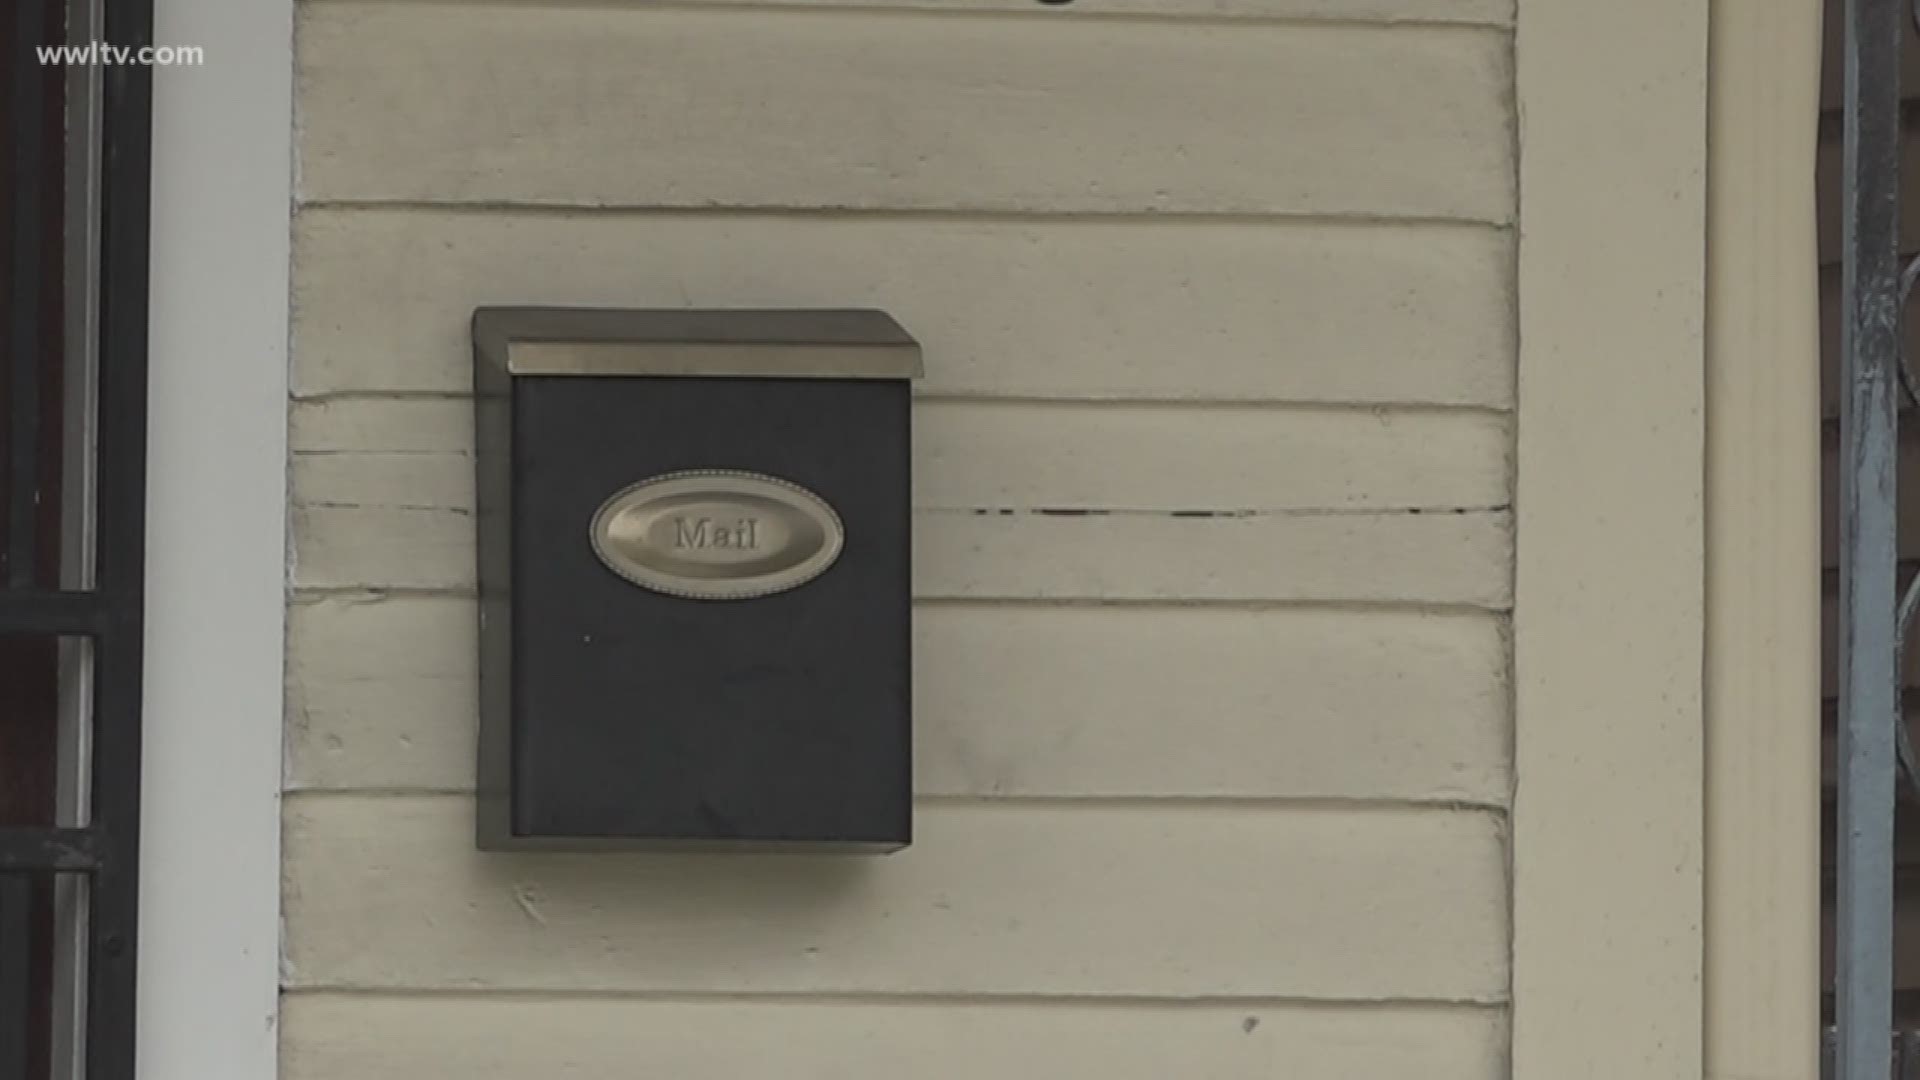 Residents say important mail that they are expecting never makes it to their door. 